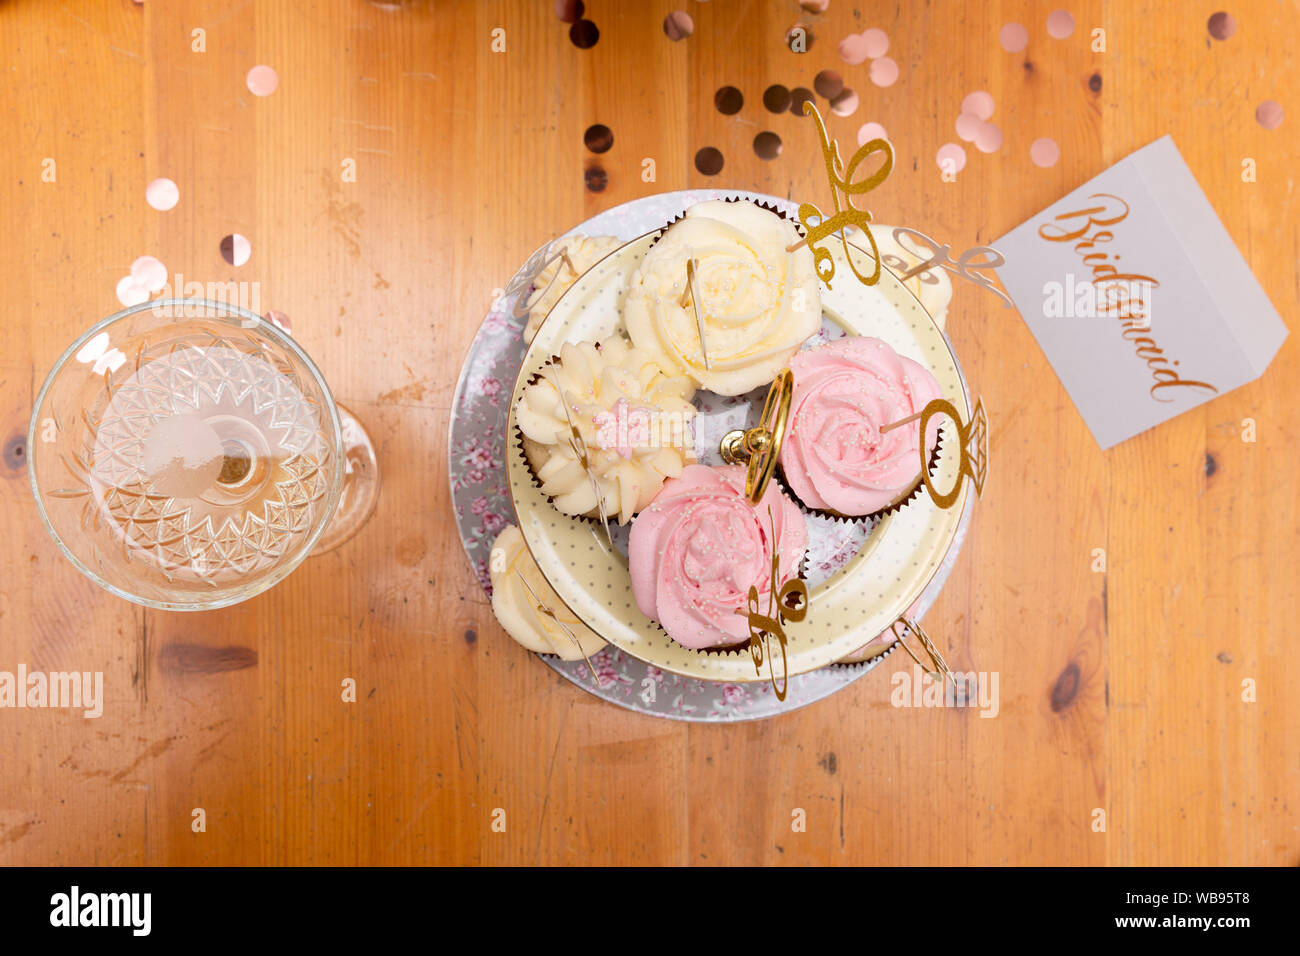 Wedding party cupcakes and glass of champagne on wooden table. Bachelorette party Stock Photo